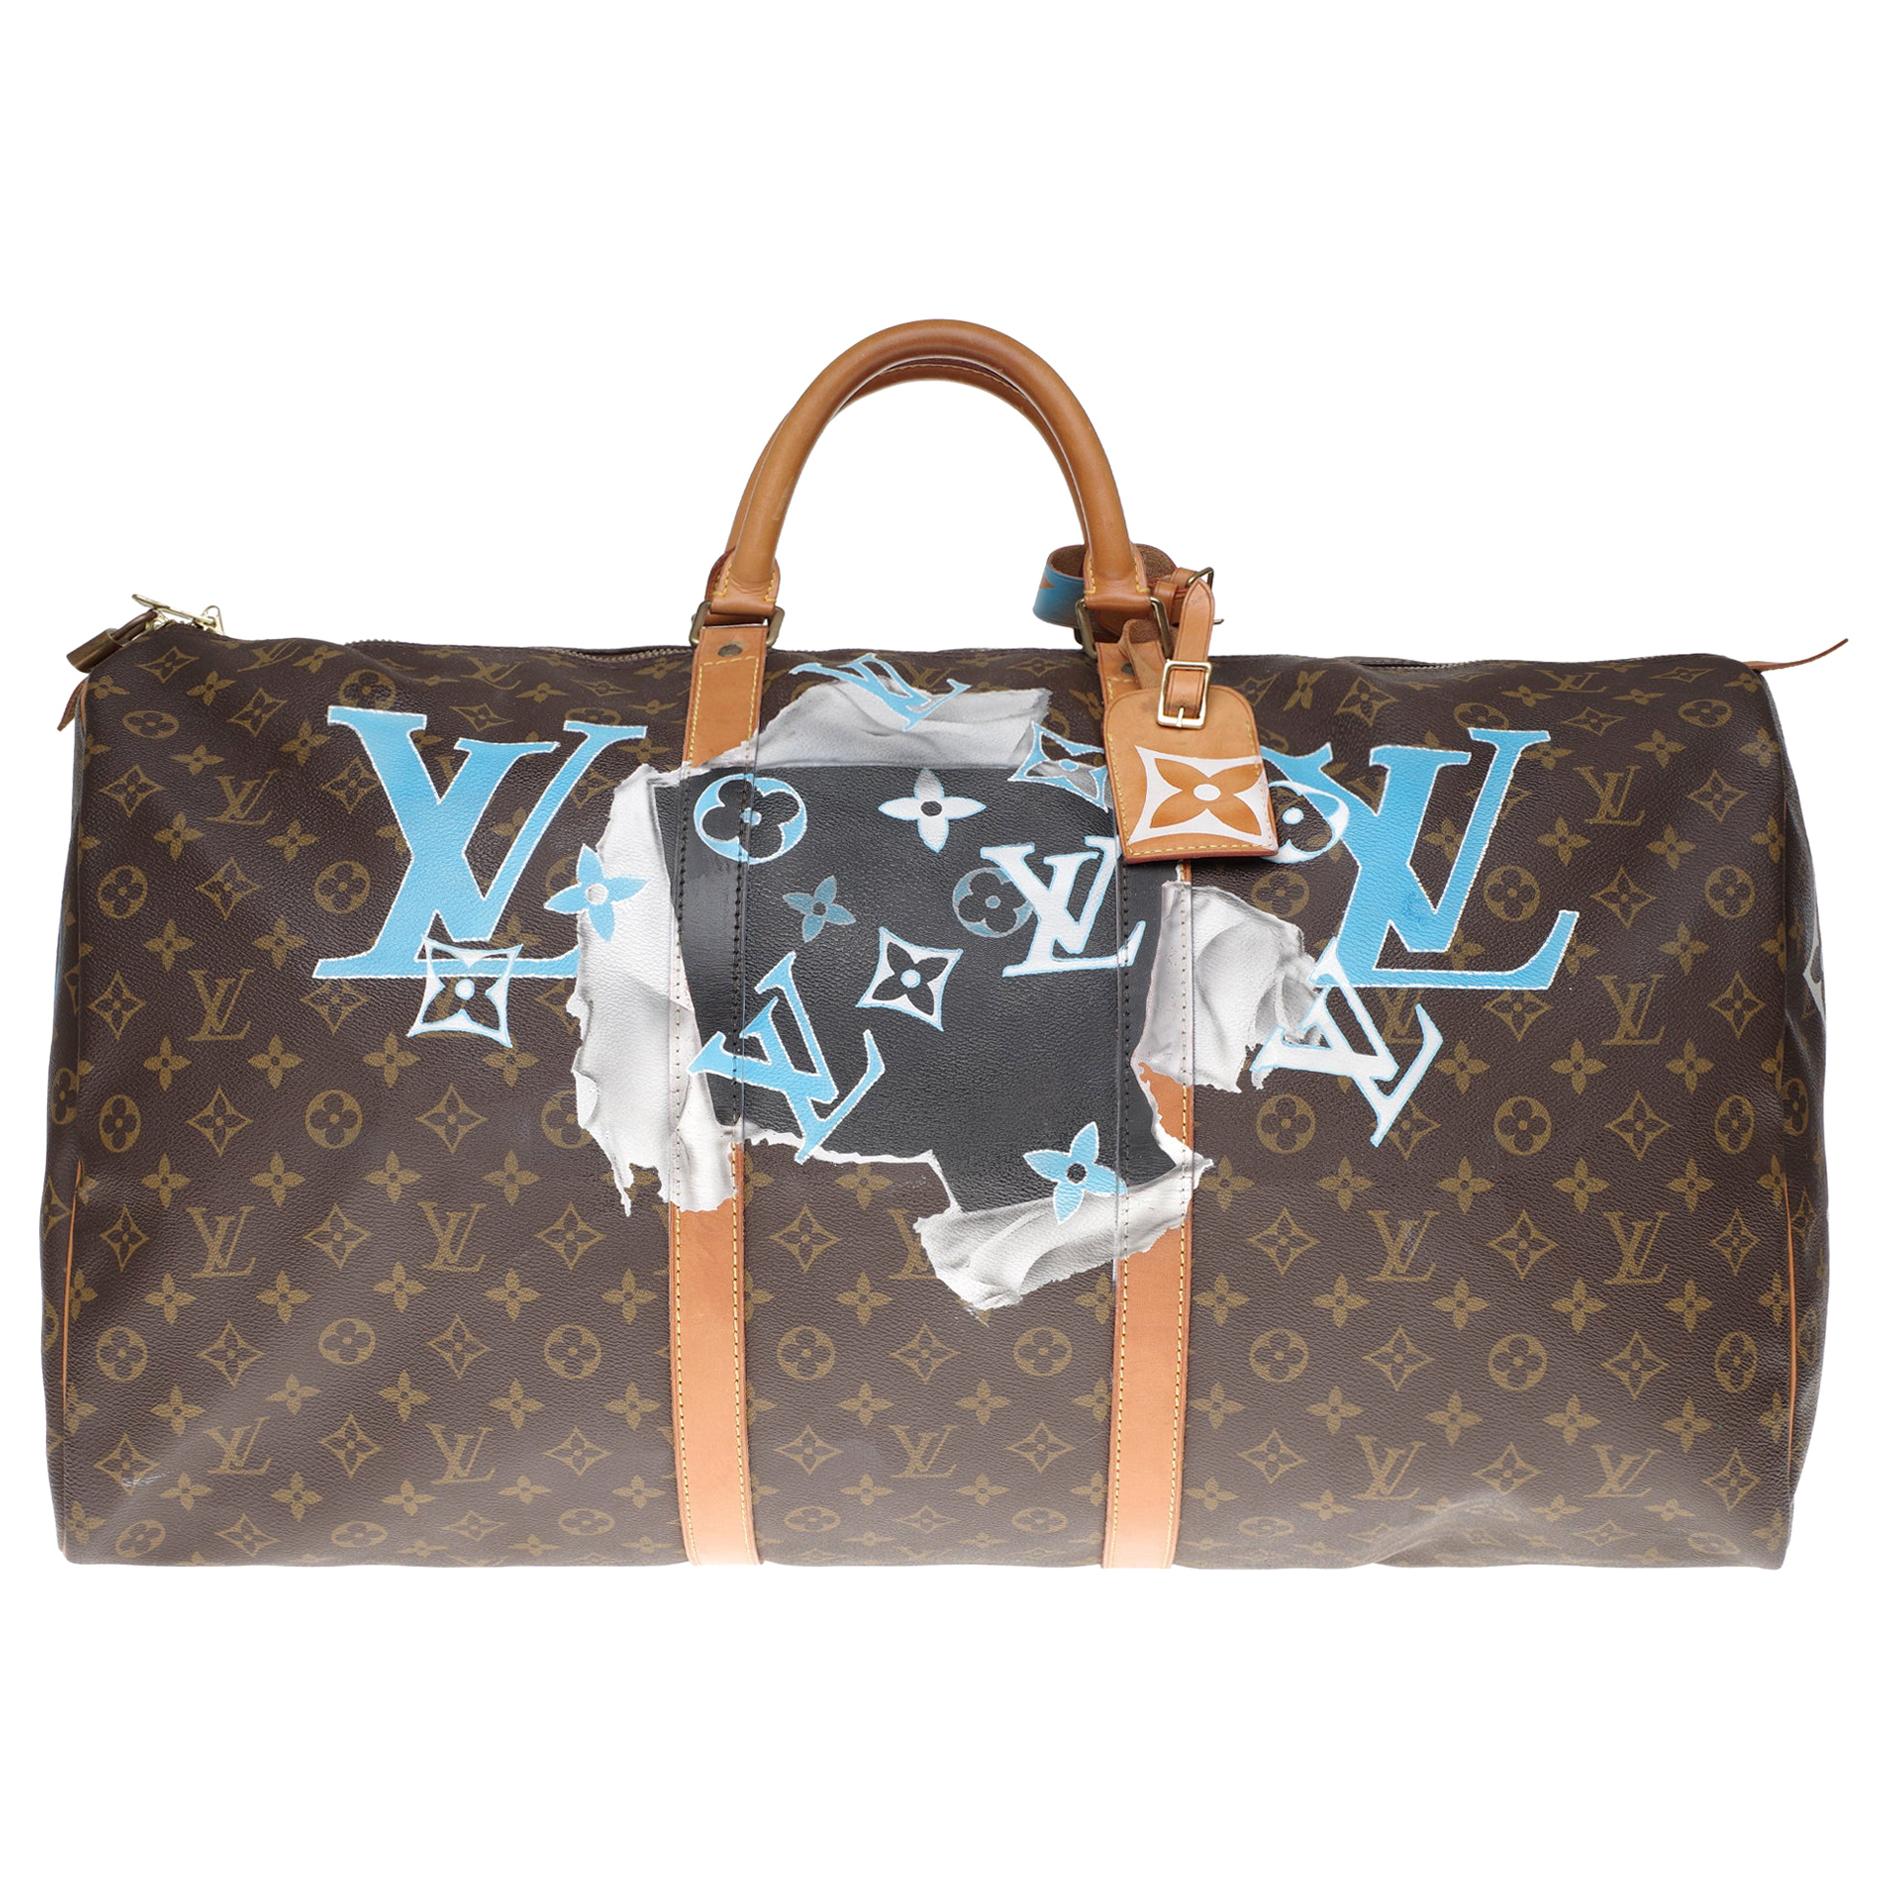 Customized LV Keepall 60 Travel bag in monogram canvas "F***" #66 !